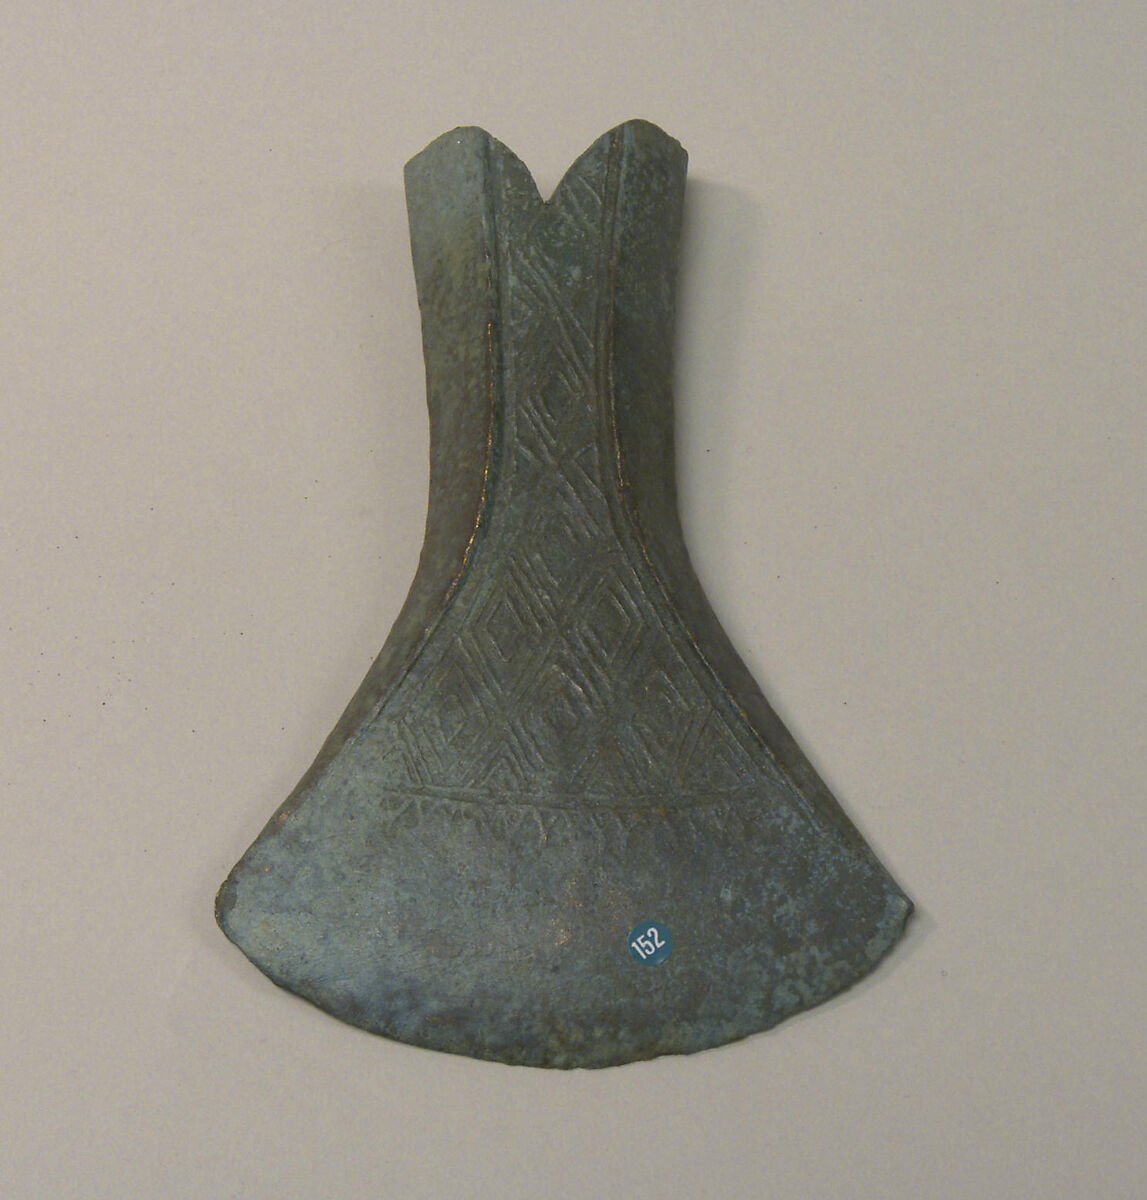 Swallowtail Hafted Ax with Diamond Pattern, Bronze, Indonesia 